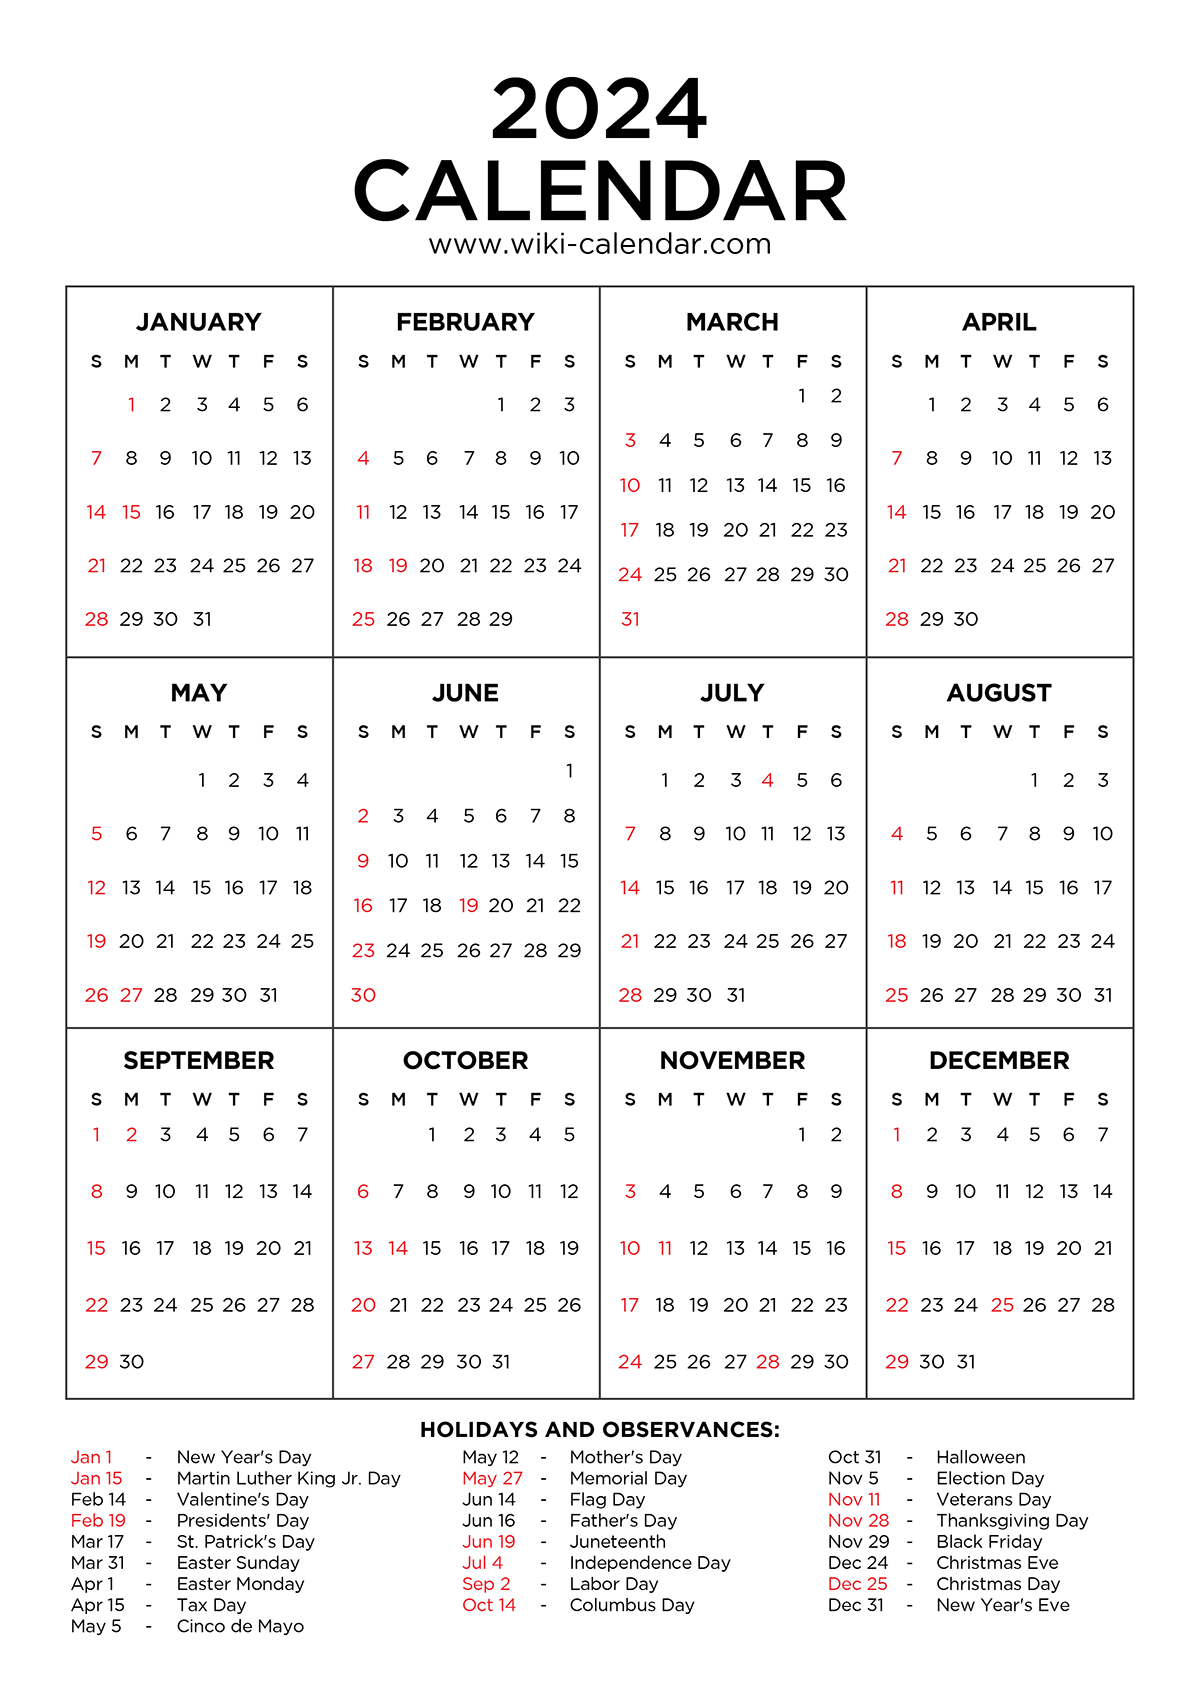 Year 2024 Calendar Printable With Holidays - Wiki Calendar pertaining to Free Printable Calendar 2024 By Month With Holidays